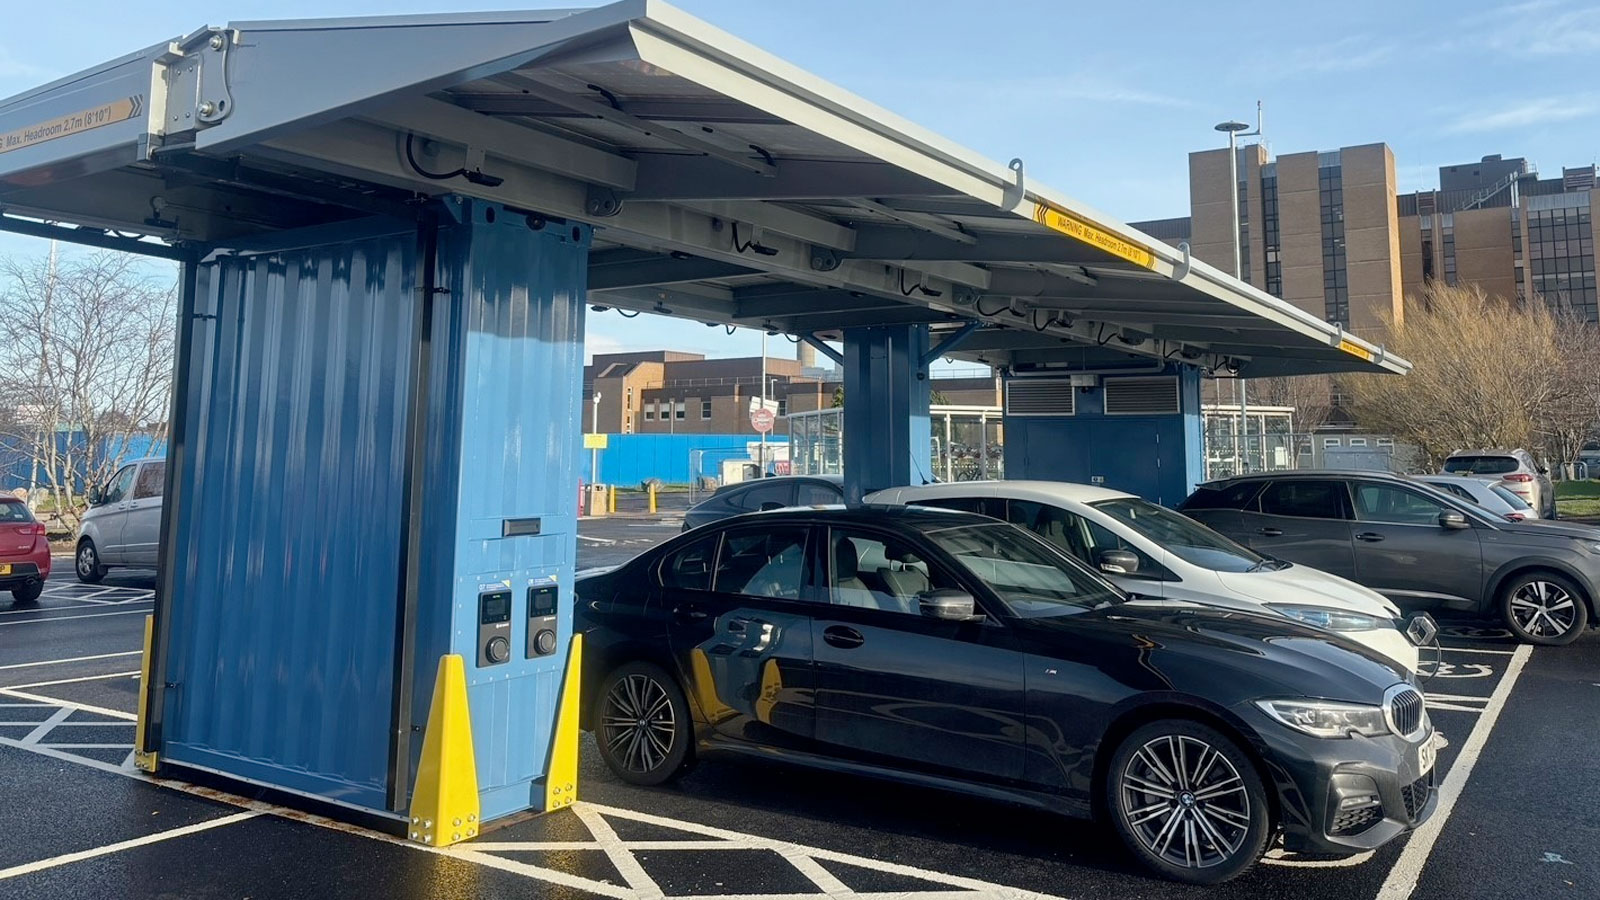 Raigmore Hospital in Inverness, Scotland, has introduced a new solar-powered electric vehicle (EV) charging hub, the first of its kind in Scotland.